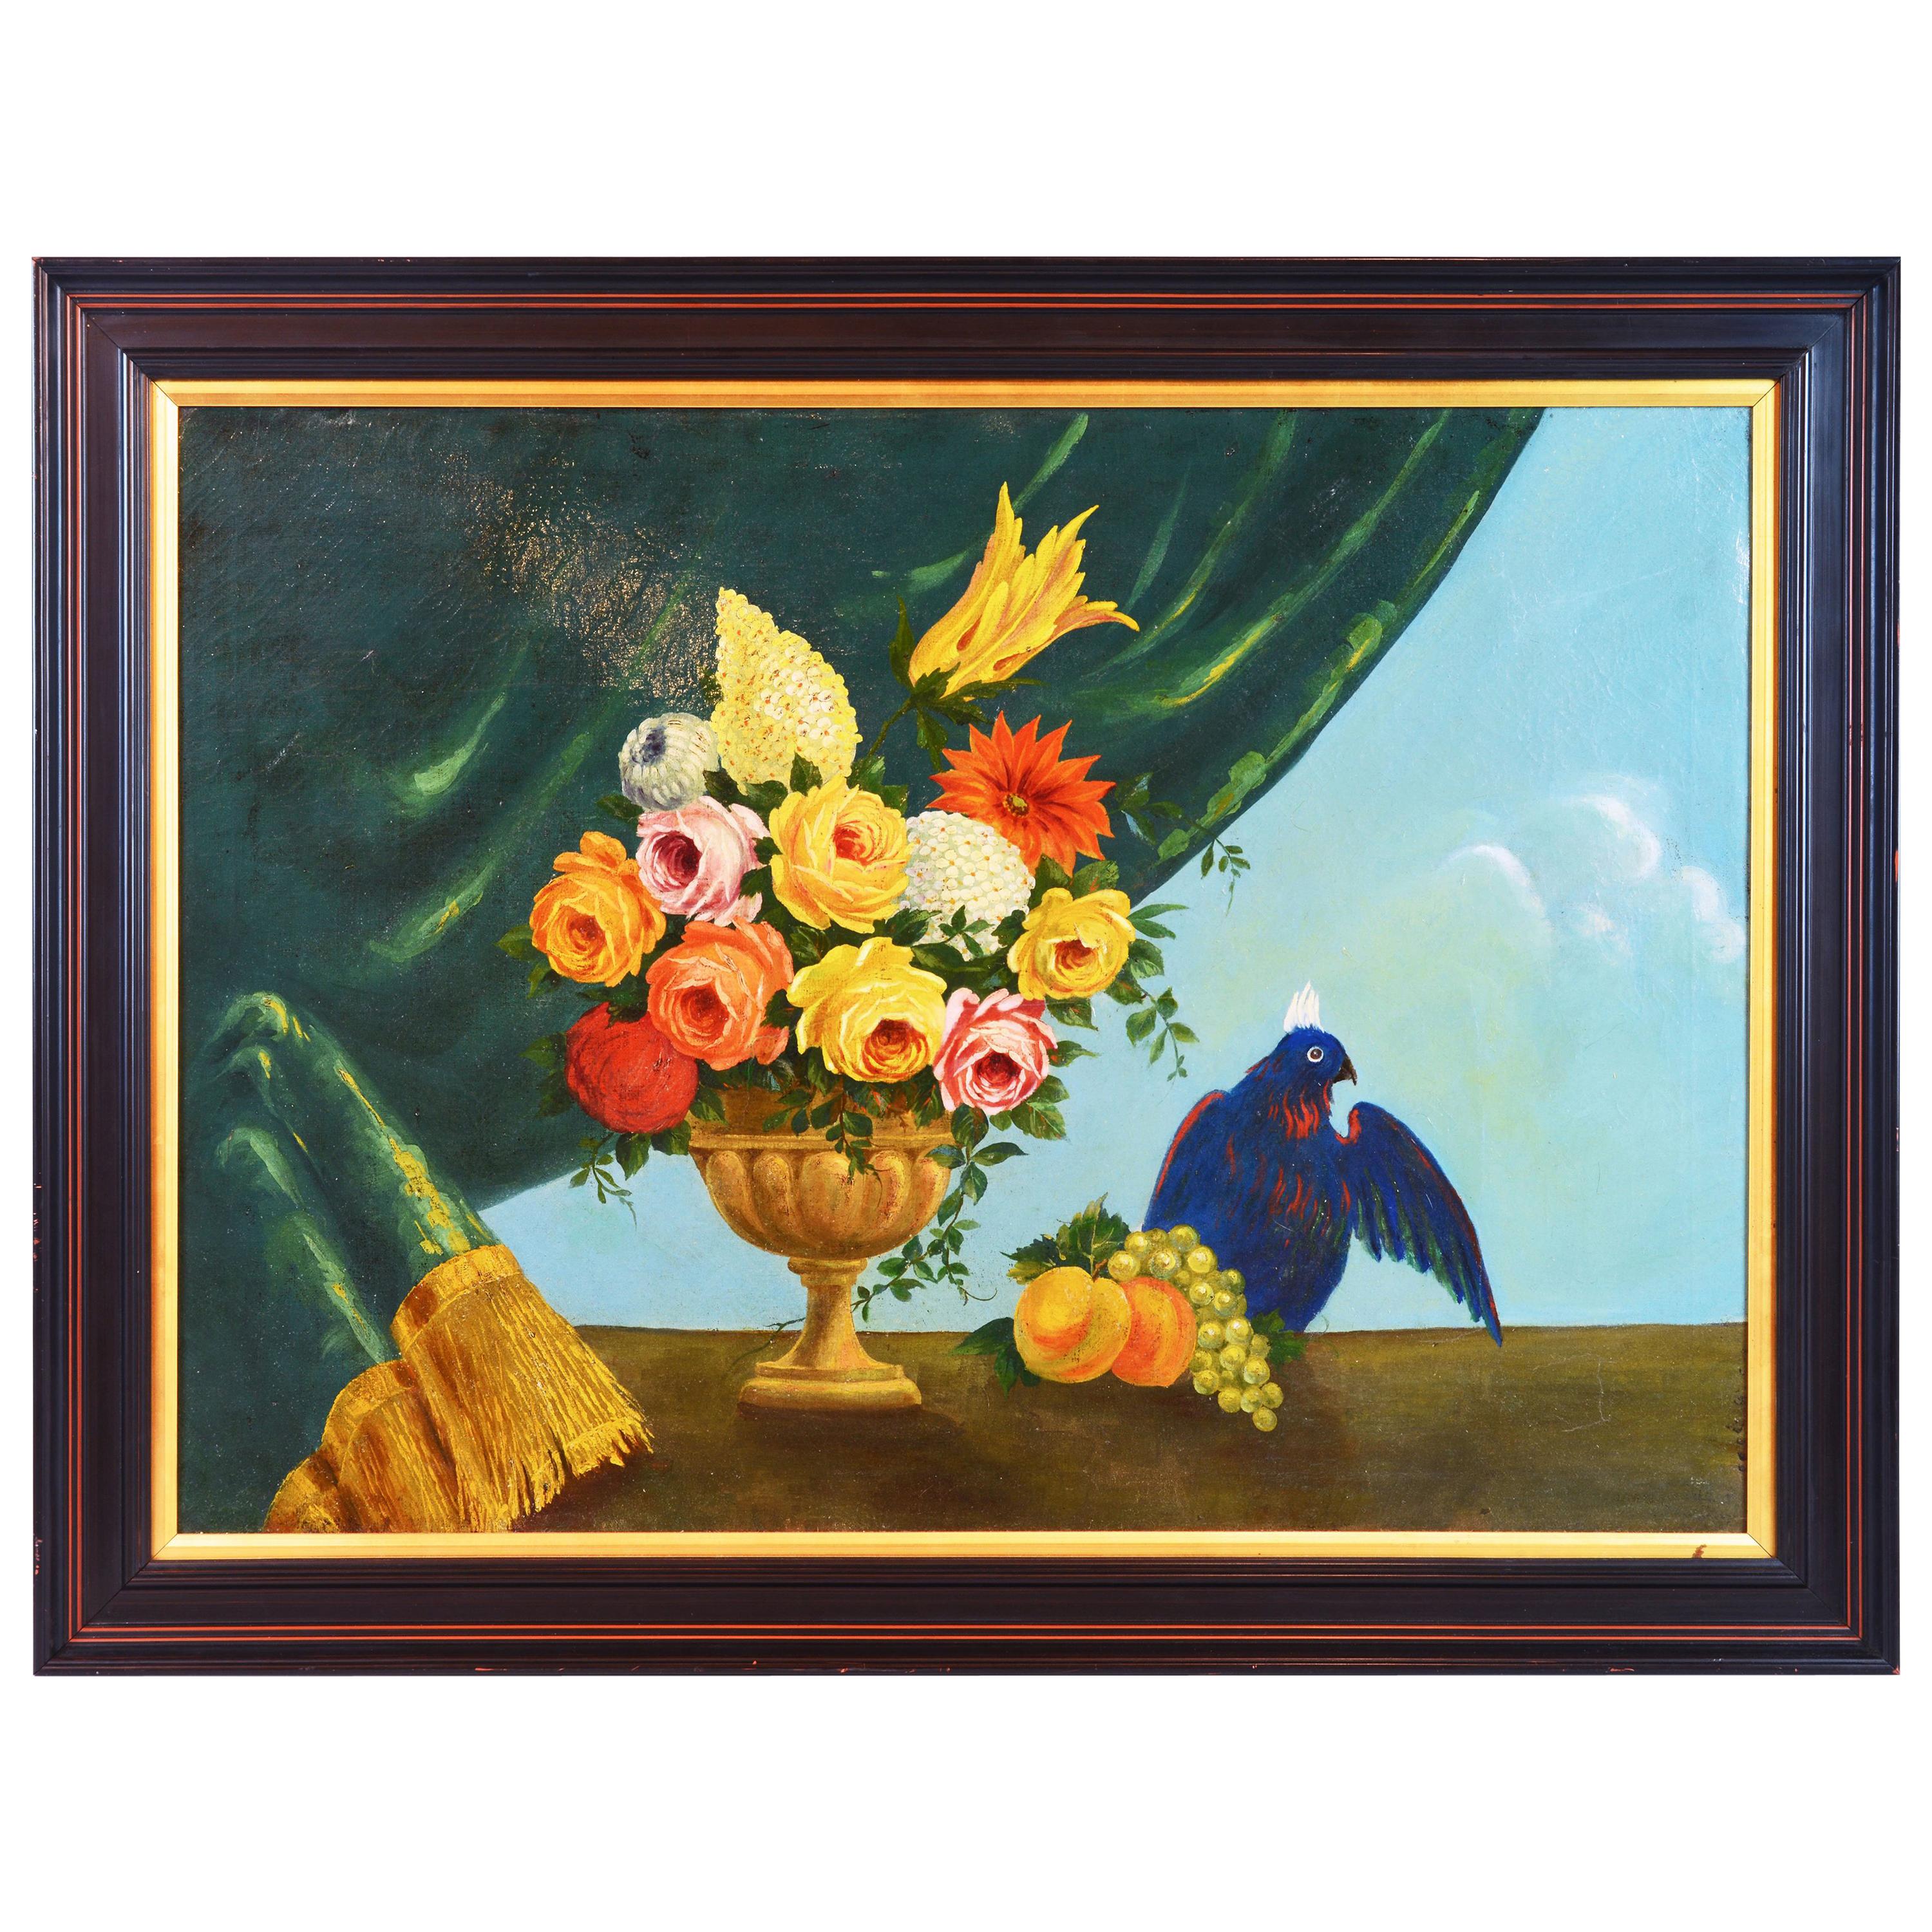 Italian Provincial 19th Century Oil with Flowers, Fruit and Blue Cockatoo